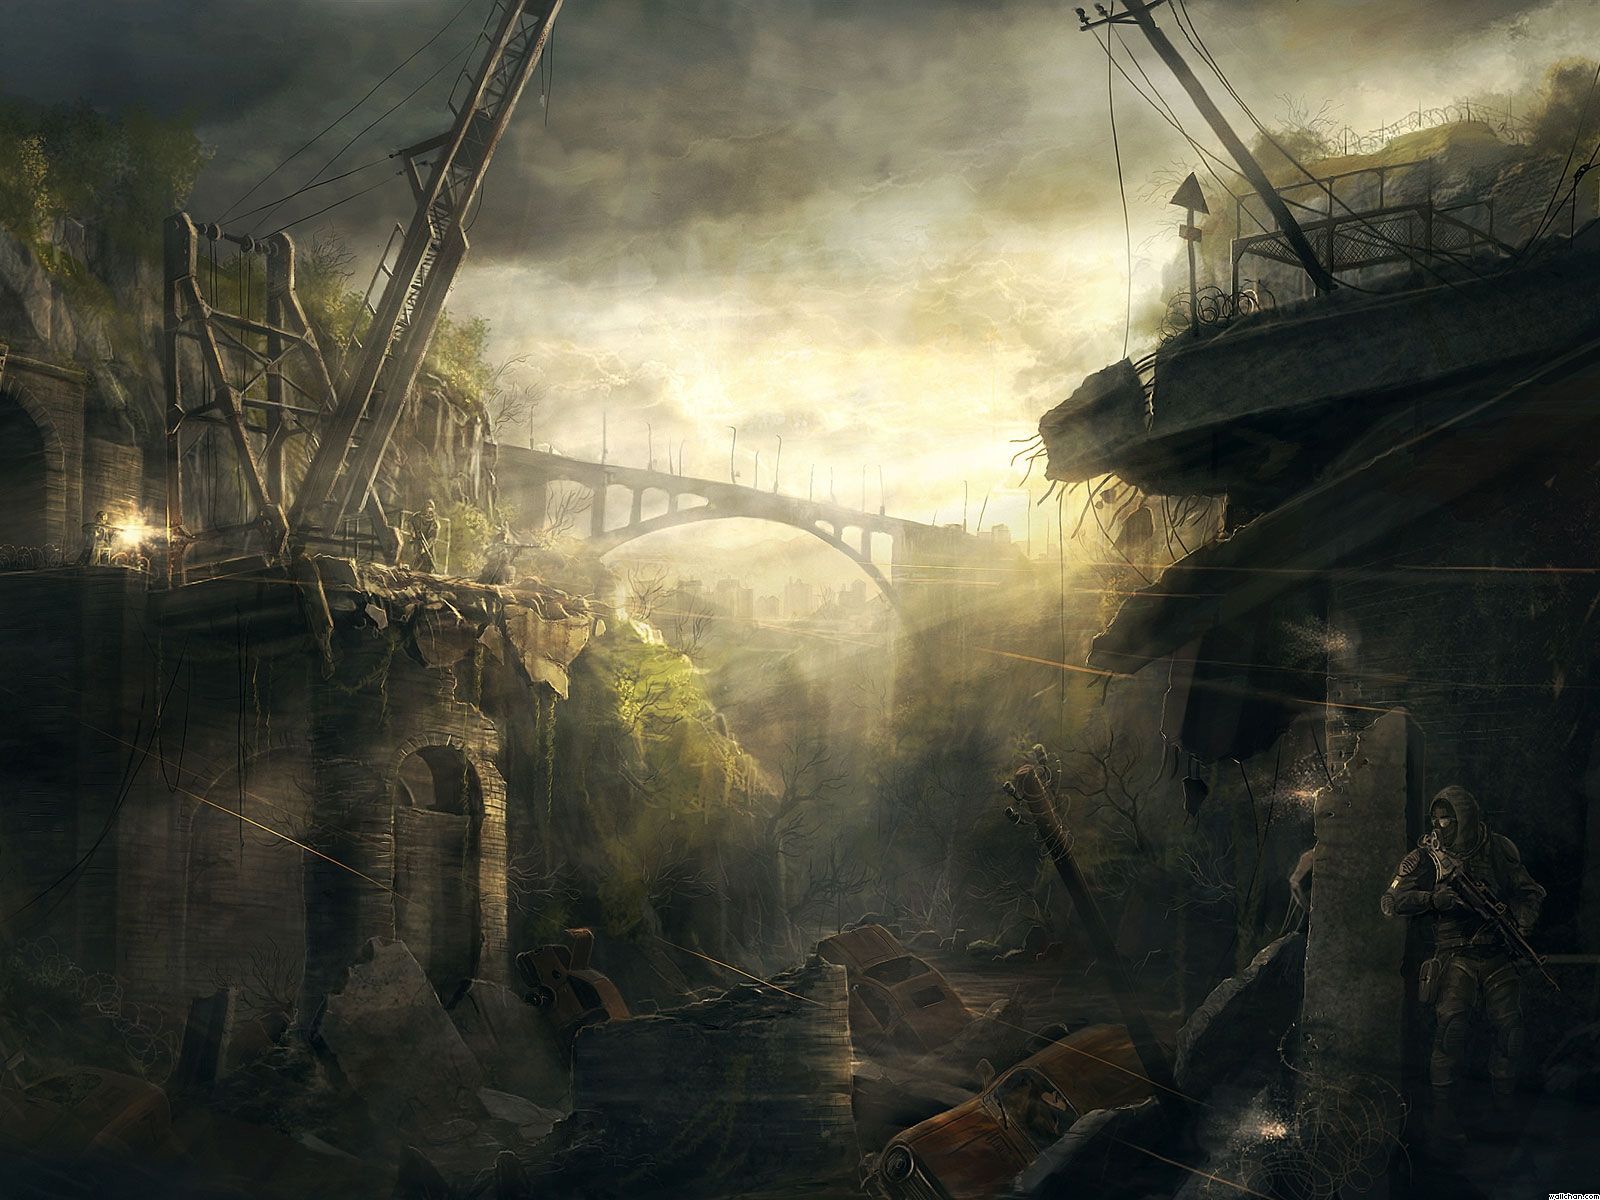 doomsday destruction Wallpaper: end of the world. Post apocalyptic city, Post apocalyptic art, Post apocalyptic